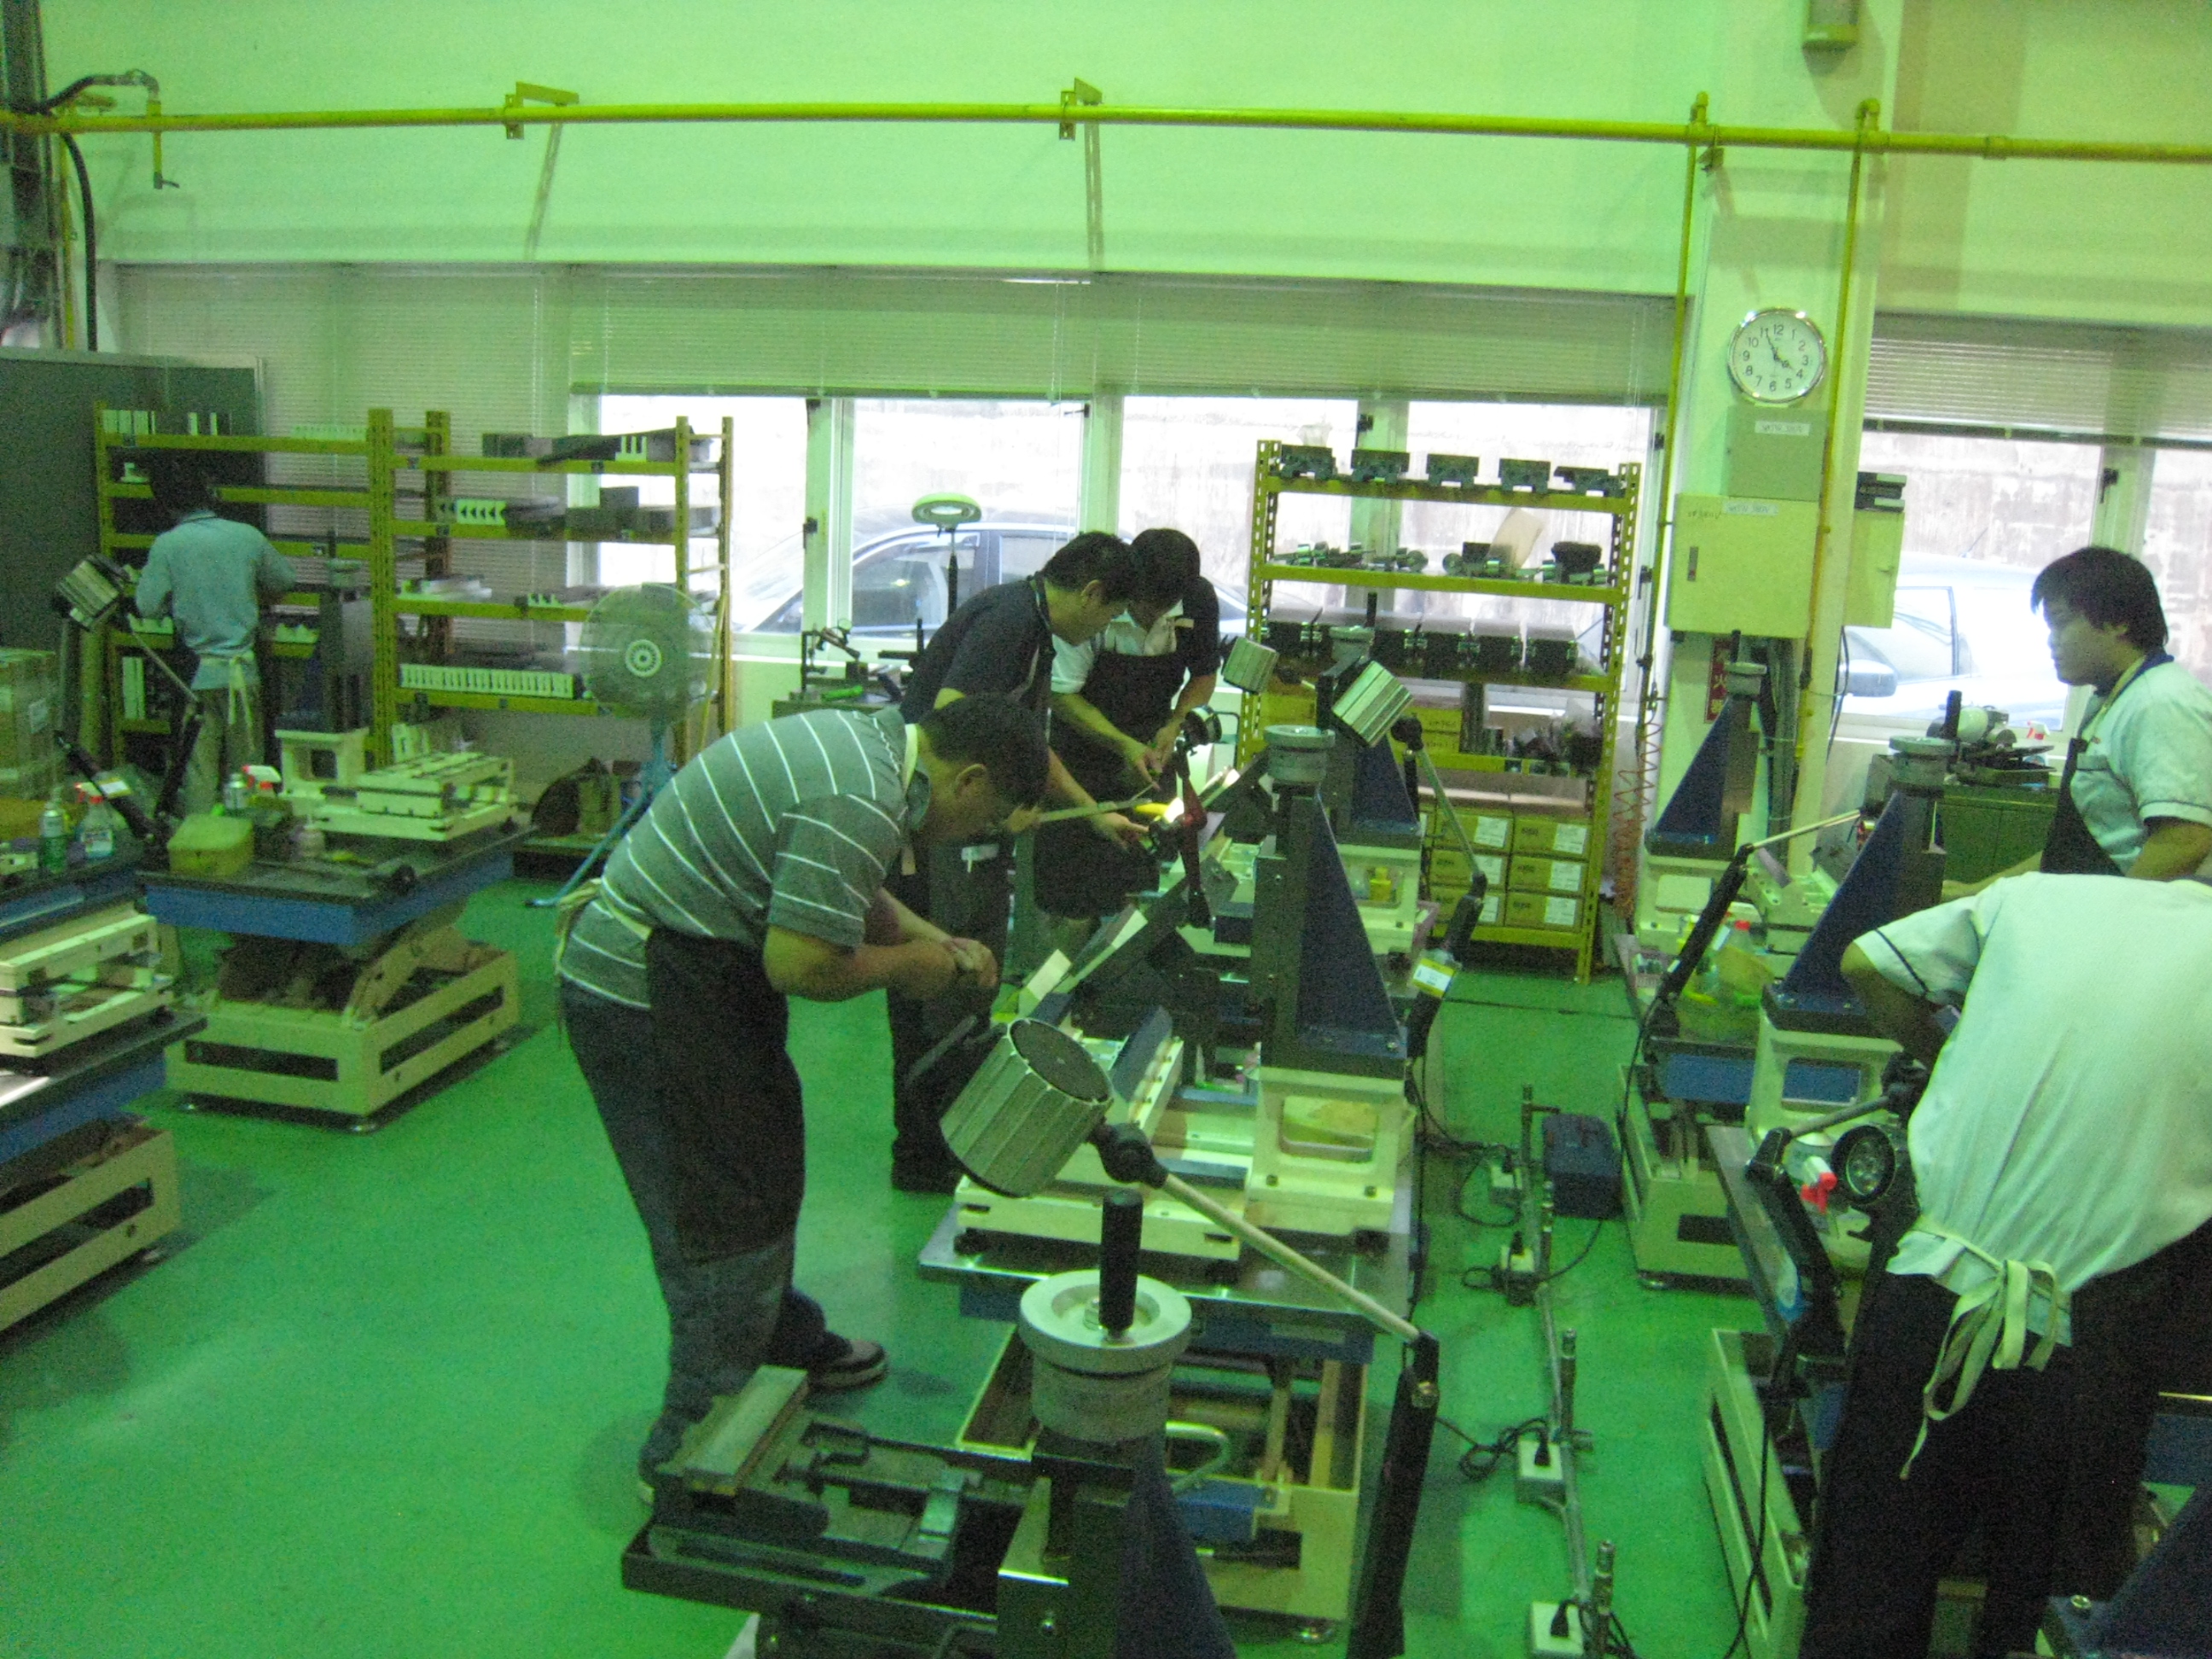 IMG 4014
Class room in Taiwan at PMC, Precision Machine Research Center.  See the special table we built and special fixtures we made to hold small mills we had the students scrape as a project.